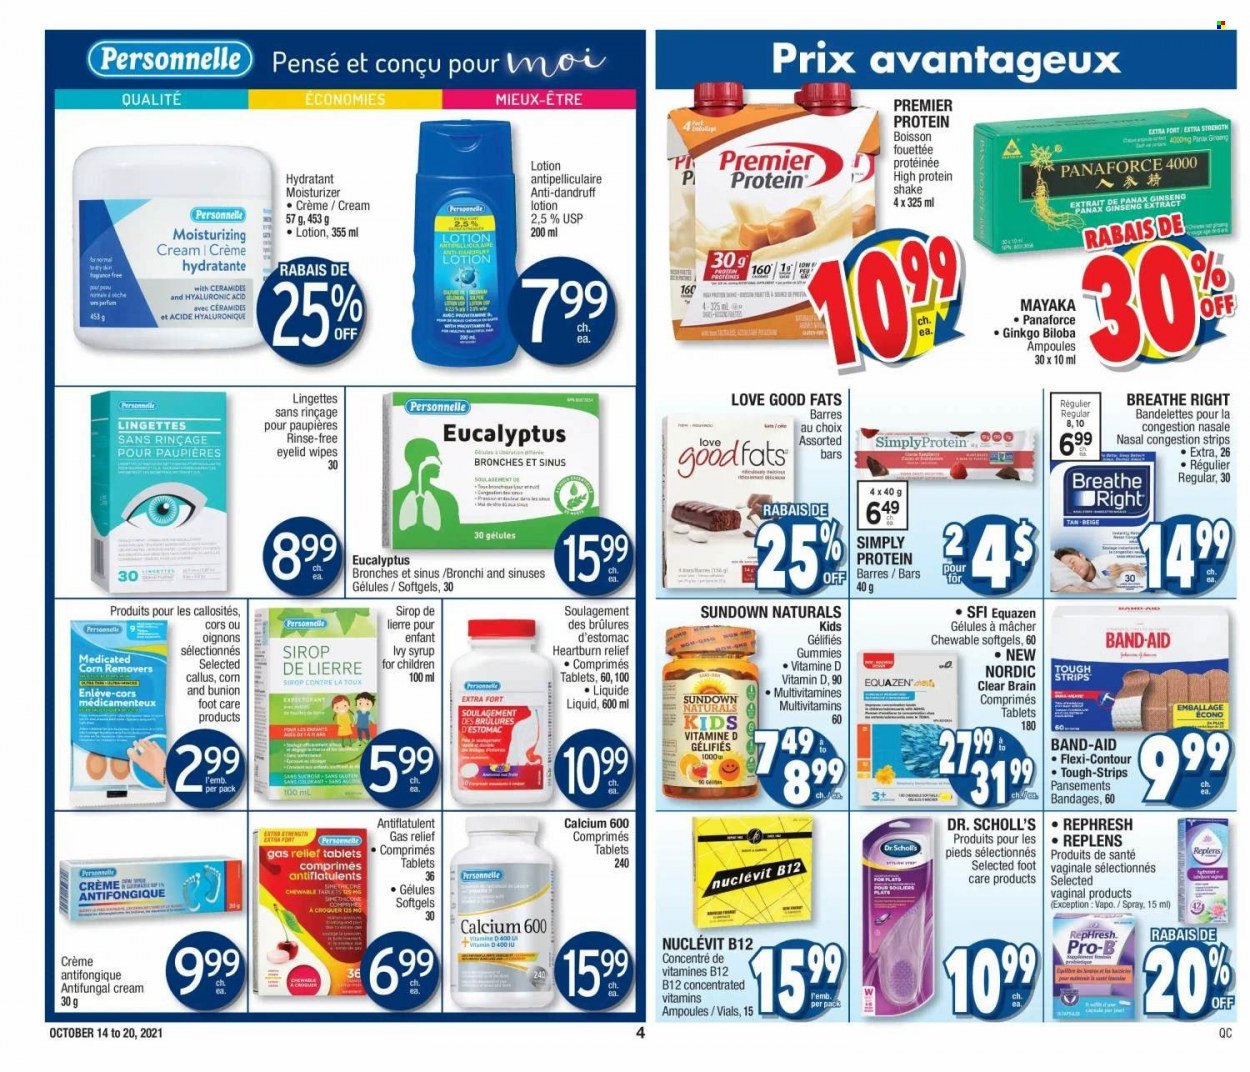 thumbnail - Jean Coutu Flyer - October 14, 2021 - October 20, 2021 - Sales products - corn, syrup, wipes, XTRA, moisturizer, body lotion, foot care, contour, Dr. Scholl's, multivitamin, Sundown Naturals, ginseng, band-aid, calcium. Page 4.